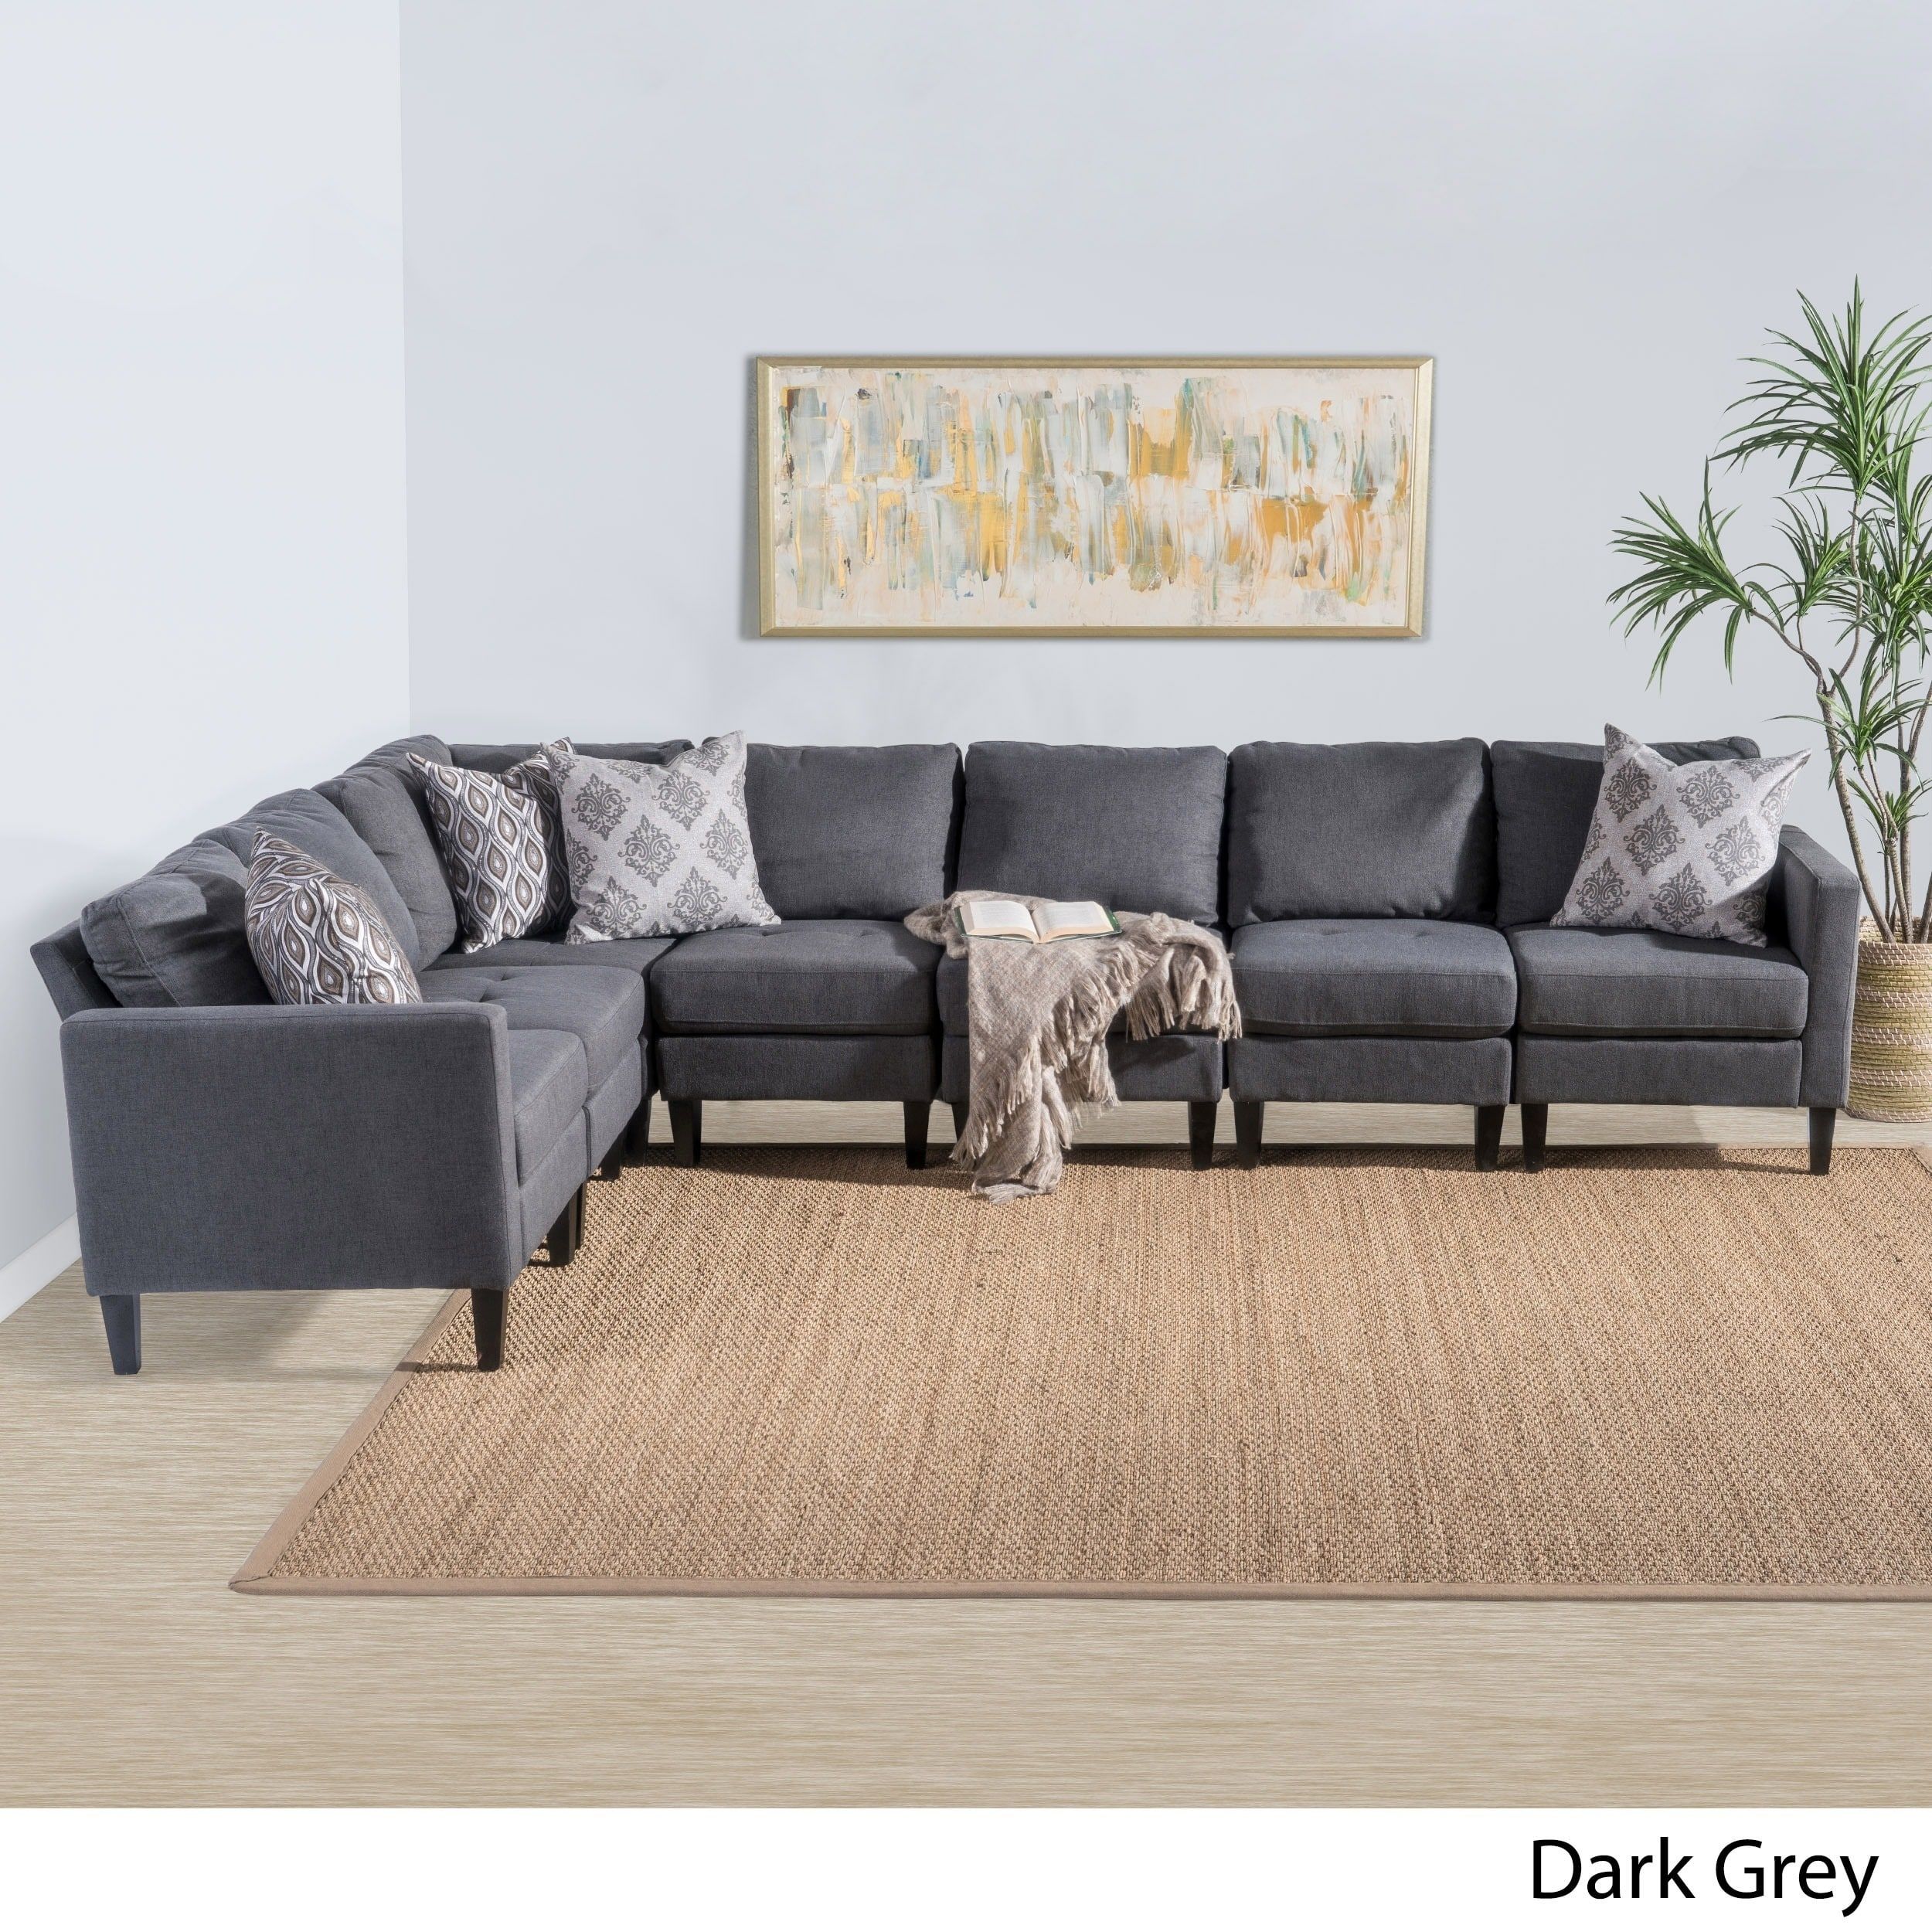 Zahra 7 Piece Fabric Sectional Sofa Setchristopher Knight Home Throughout Fabric Sectional Sofas (Photo 8 of 10)